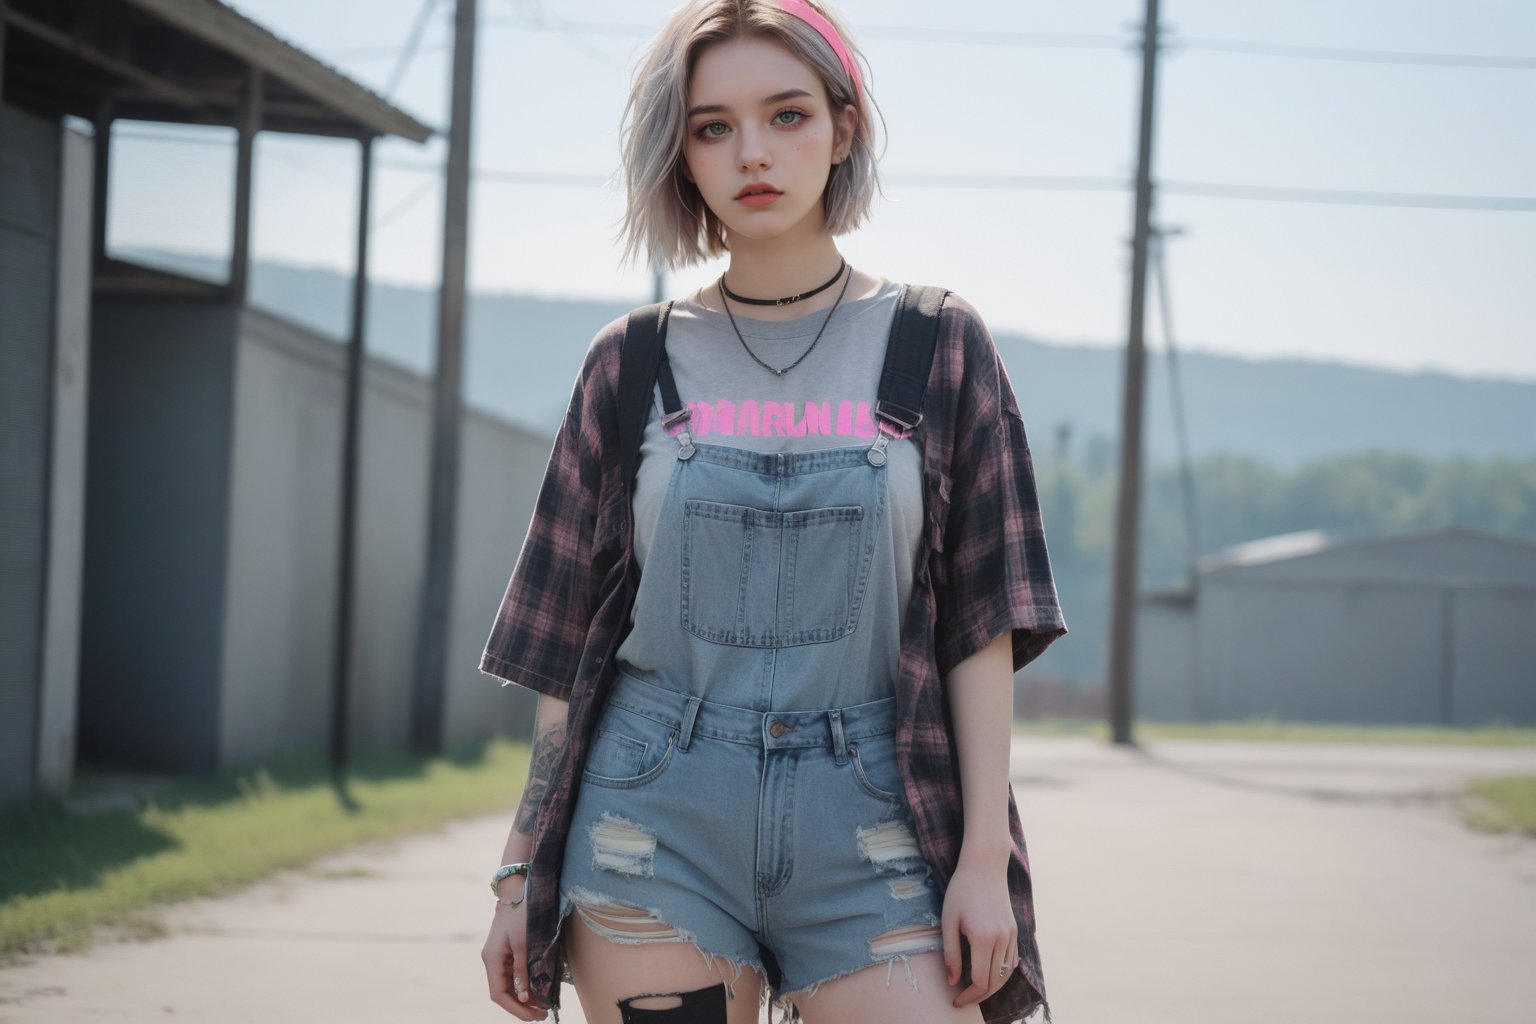 Girl portrait, Pajaritito490 style. Line and ink color drawing, 1girl, solo, grunge fashion, distressed jeans, oversized ripped flannel shirt layered over graphic band t-shirt, overalls, worn sneakers with neon accessories, gray eyes, pale skin, looking at viewer ,